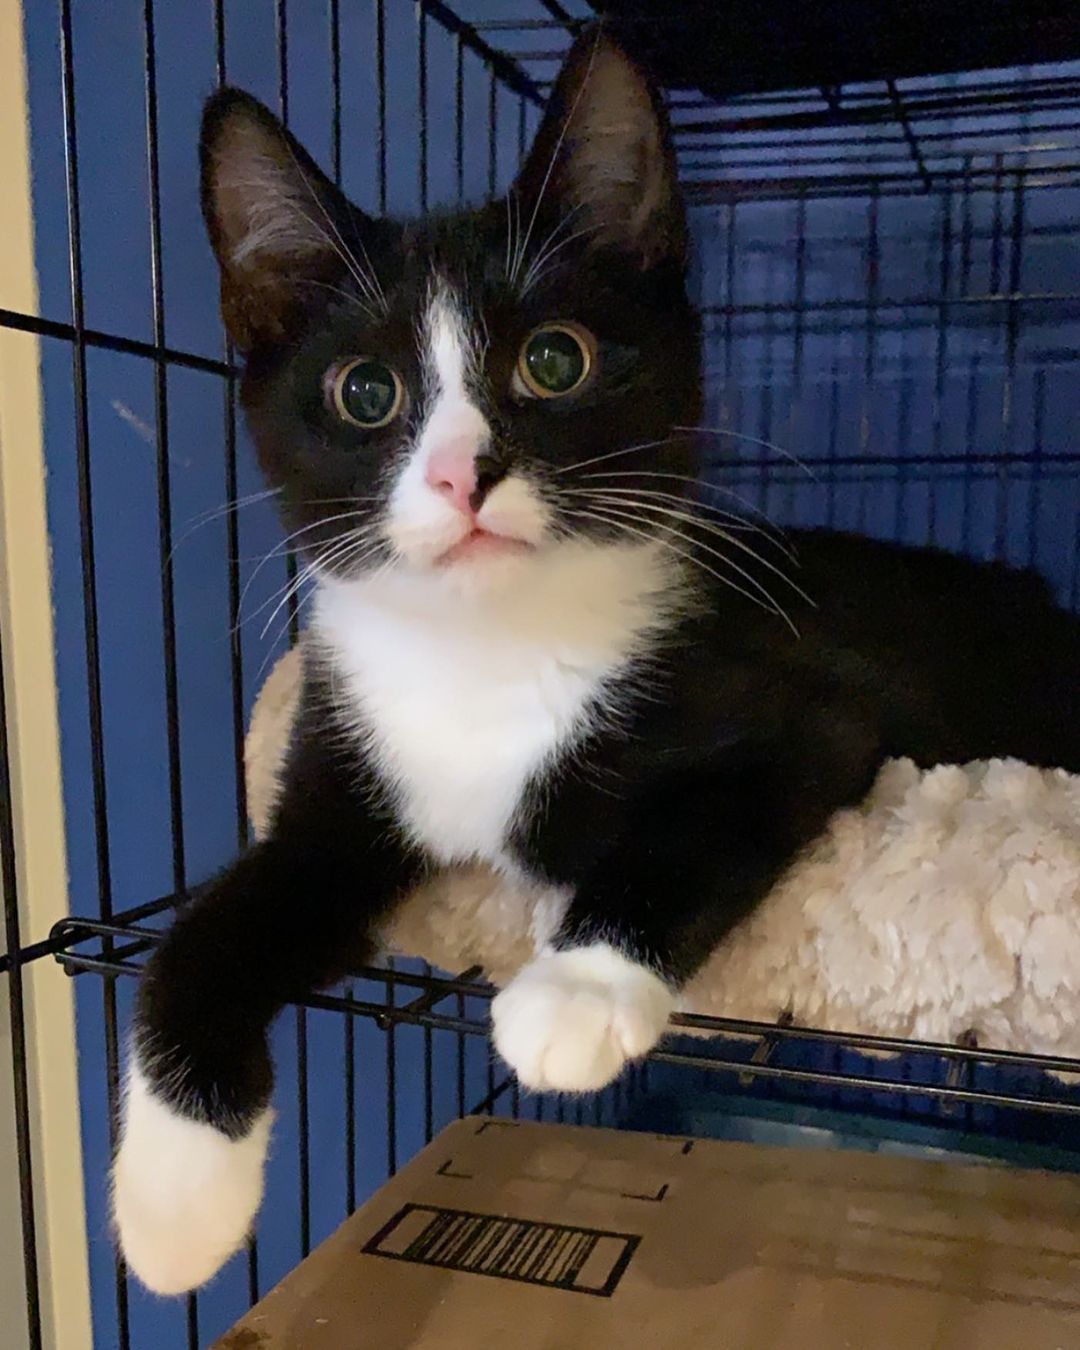 This is Owl! This handsome man is blind and is waiting for his upcoming appointment with an eye specialist. Personally we think he has a VERY boop-able nose. <a target='_blank' href='https://www.instagram.com/explore/tags/kitten/'>#kitten</a> <a target='_blank' href='https://www.instagram.com/explore/tags/kittensofinstagram/'>#kittensofinstagram</a> <a target='_blank' href='https://www.instagram.com/explore/tags/adoptdontshop/'>#adoptdontshop</a> <a target='_blank' href='https://www.instagram.com/explore/tags/hiddentreasuresadoptioncenter/'>#hiddentreasuresadoptioncenter</a>